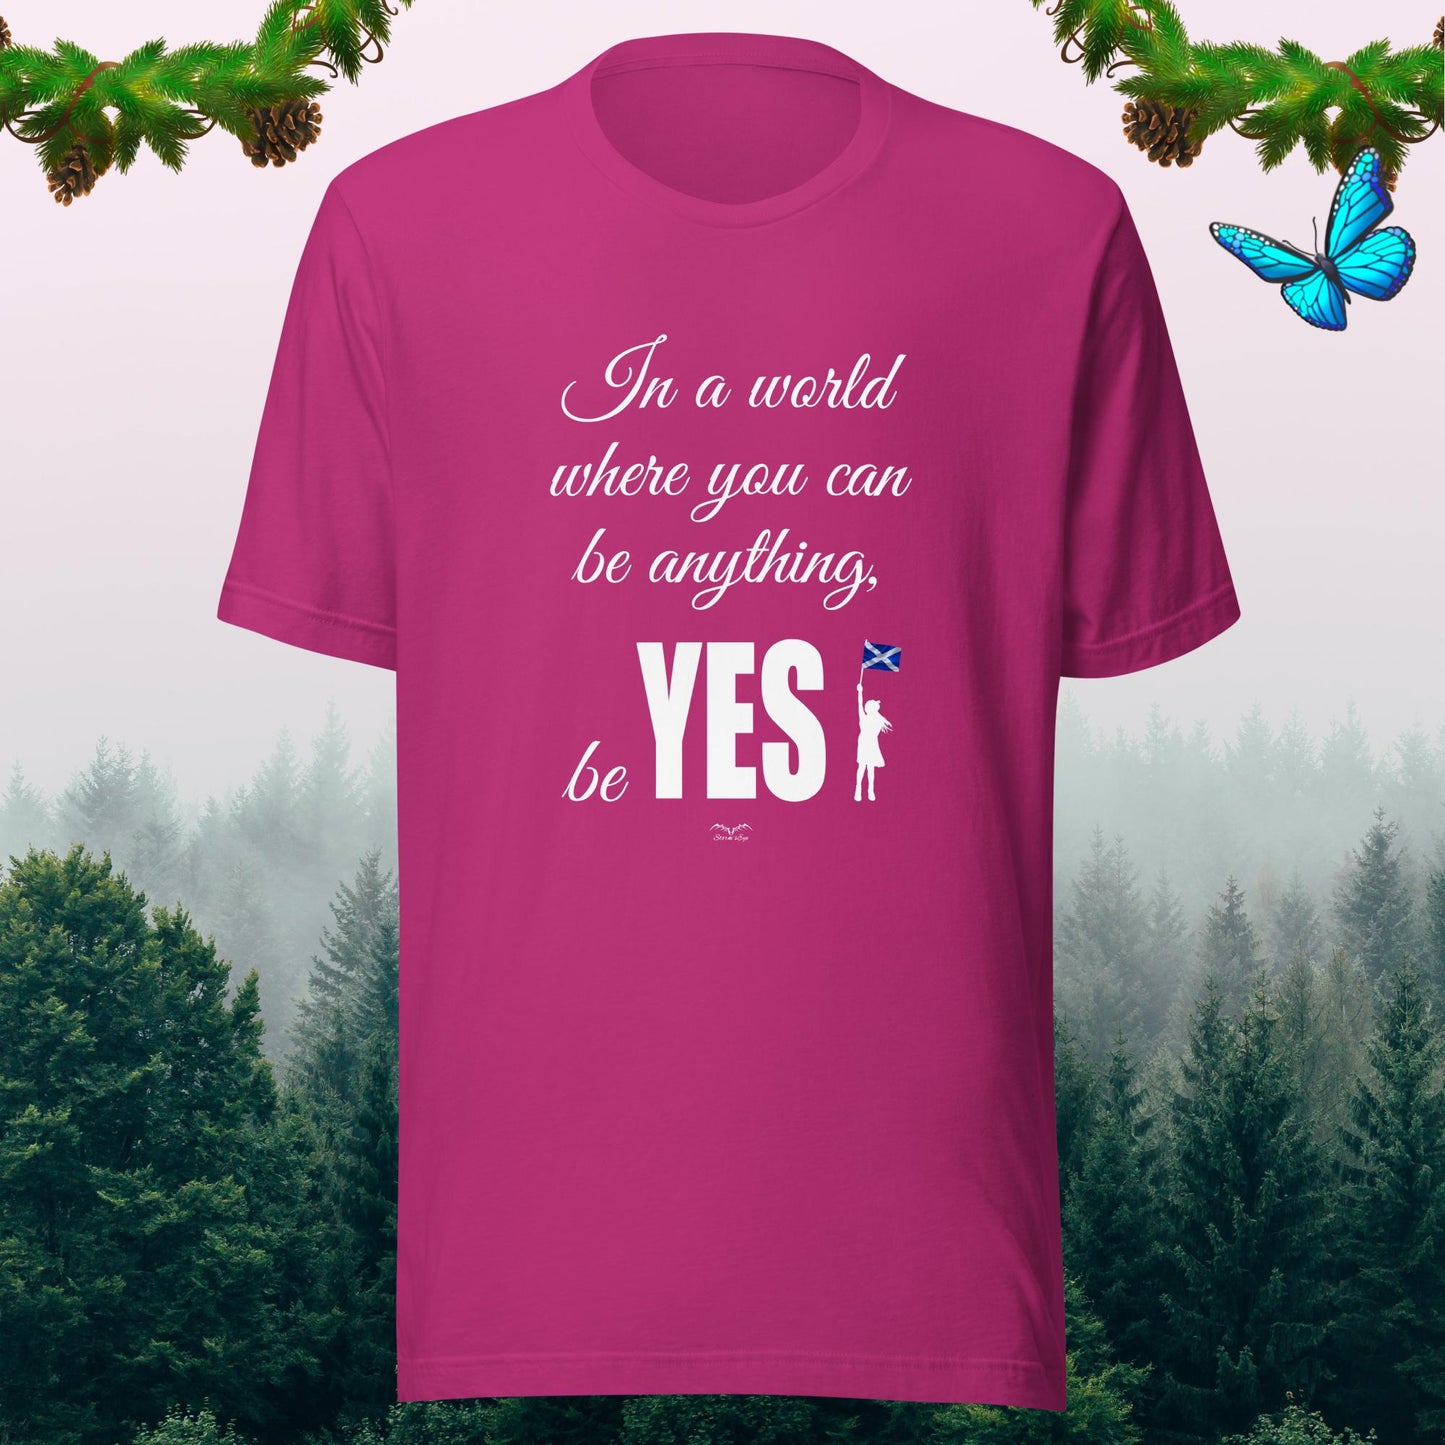 Be Yes Scottish Independence T-shirt bright pink by stormseye design